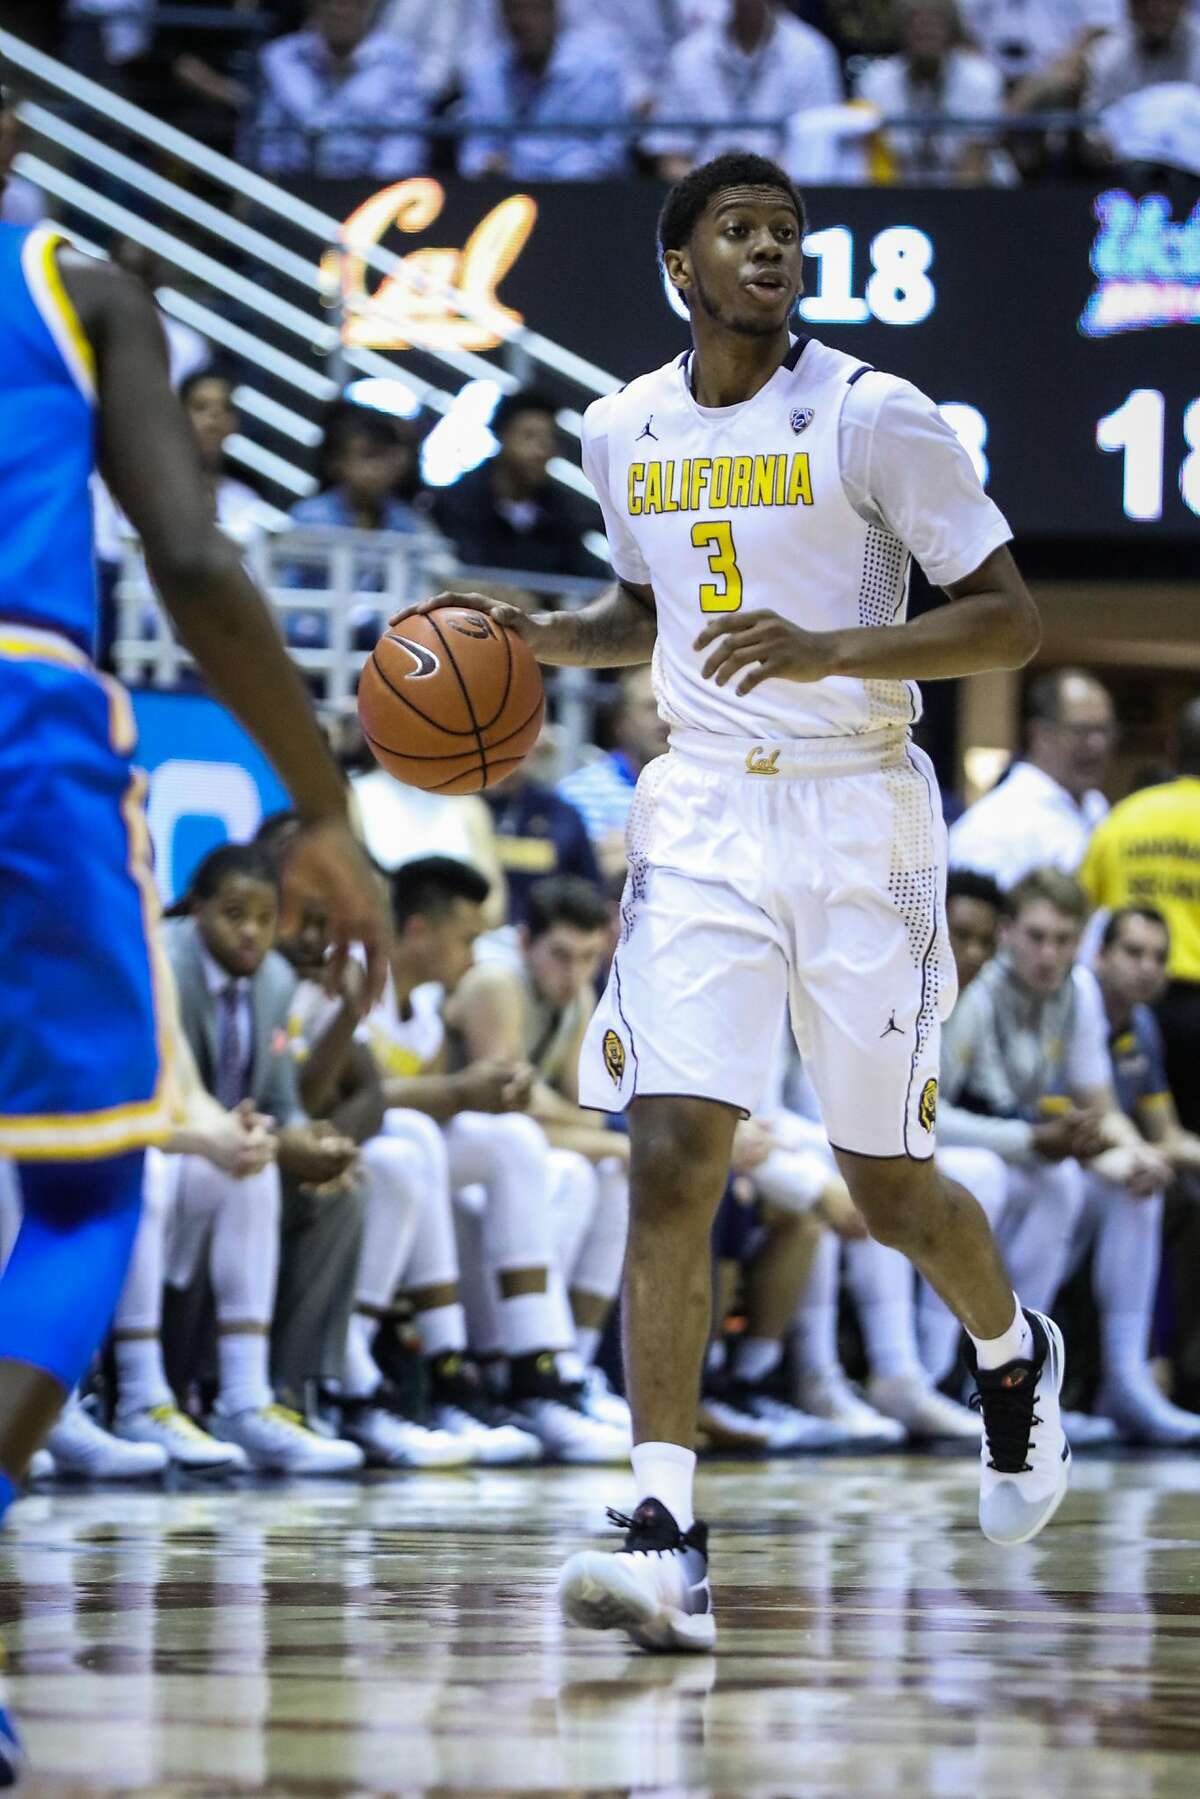 California Golden Bears Tyrone Wallace (3) drives the ball down the court in a game against UCLA Bruins at Haas Pavilion, in Berkeley, California on Thursday, February 25, 2016.